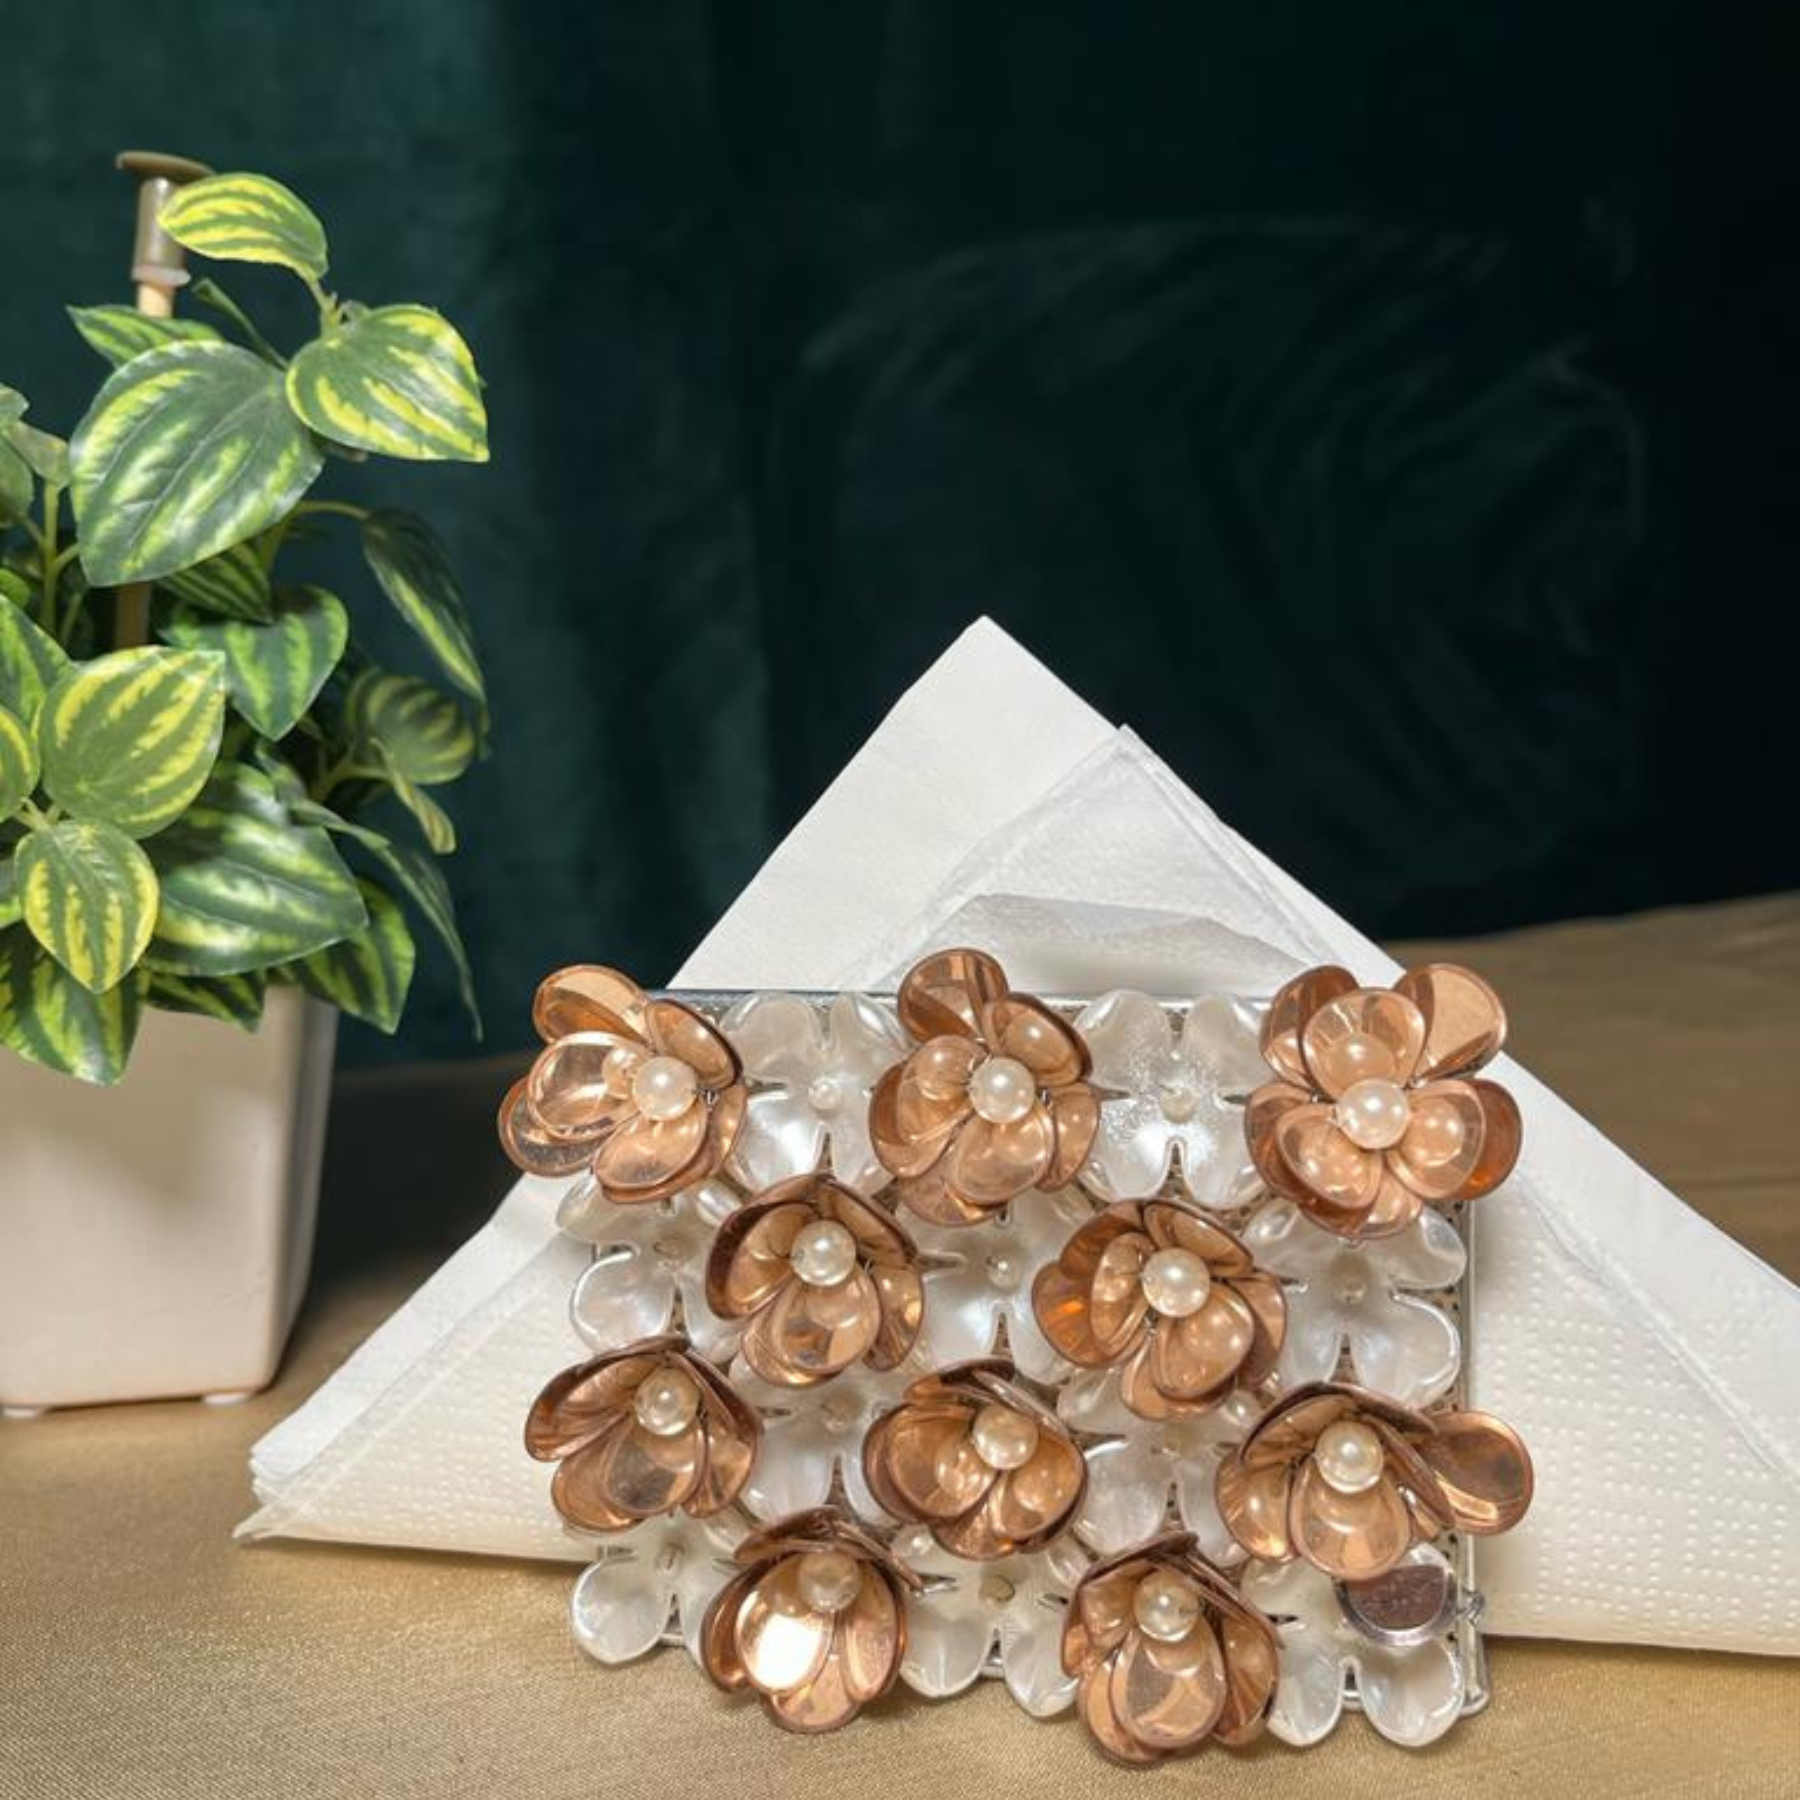 The LuxeLife Golden and White Small Floral Tissue Holder